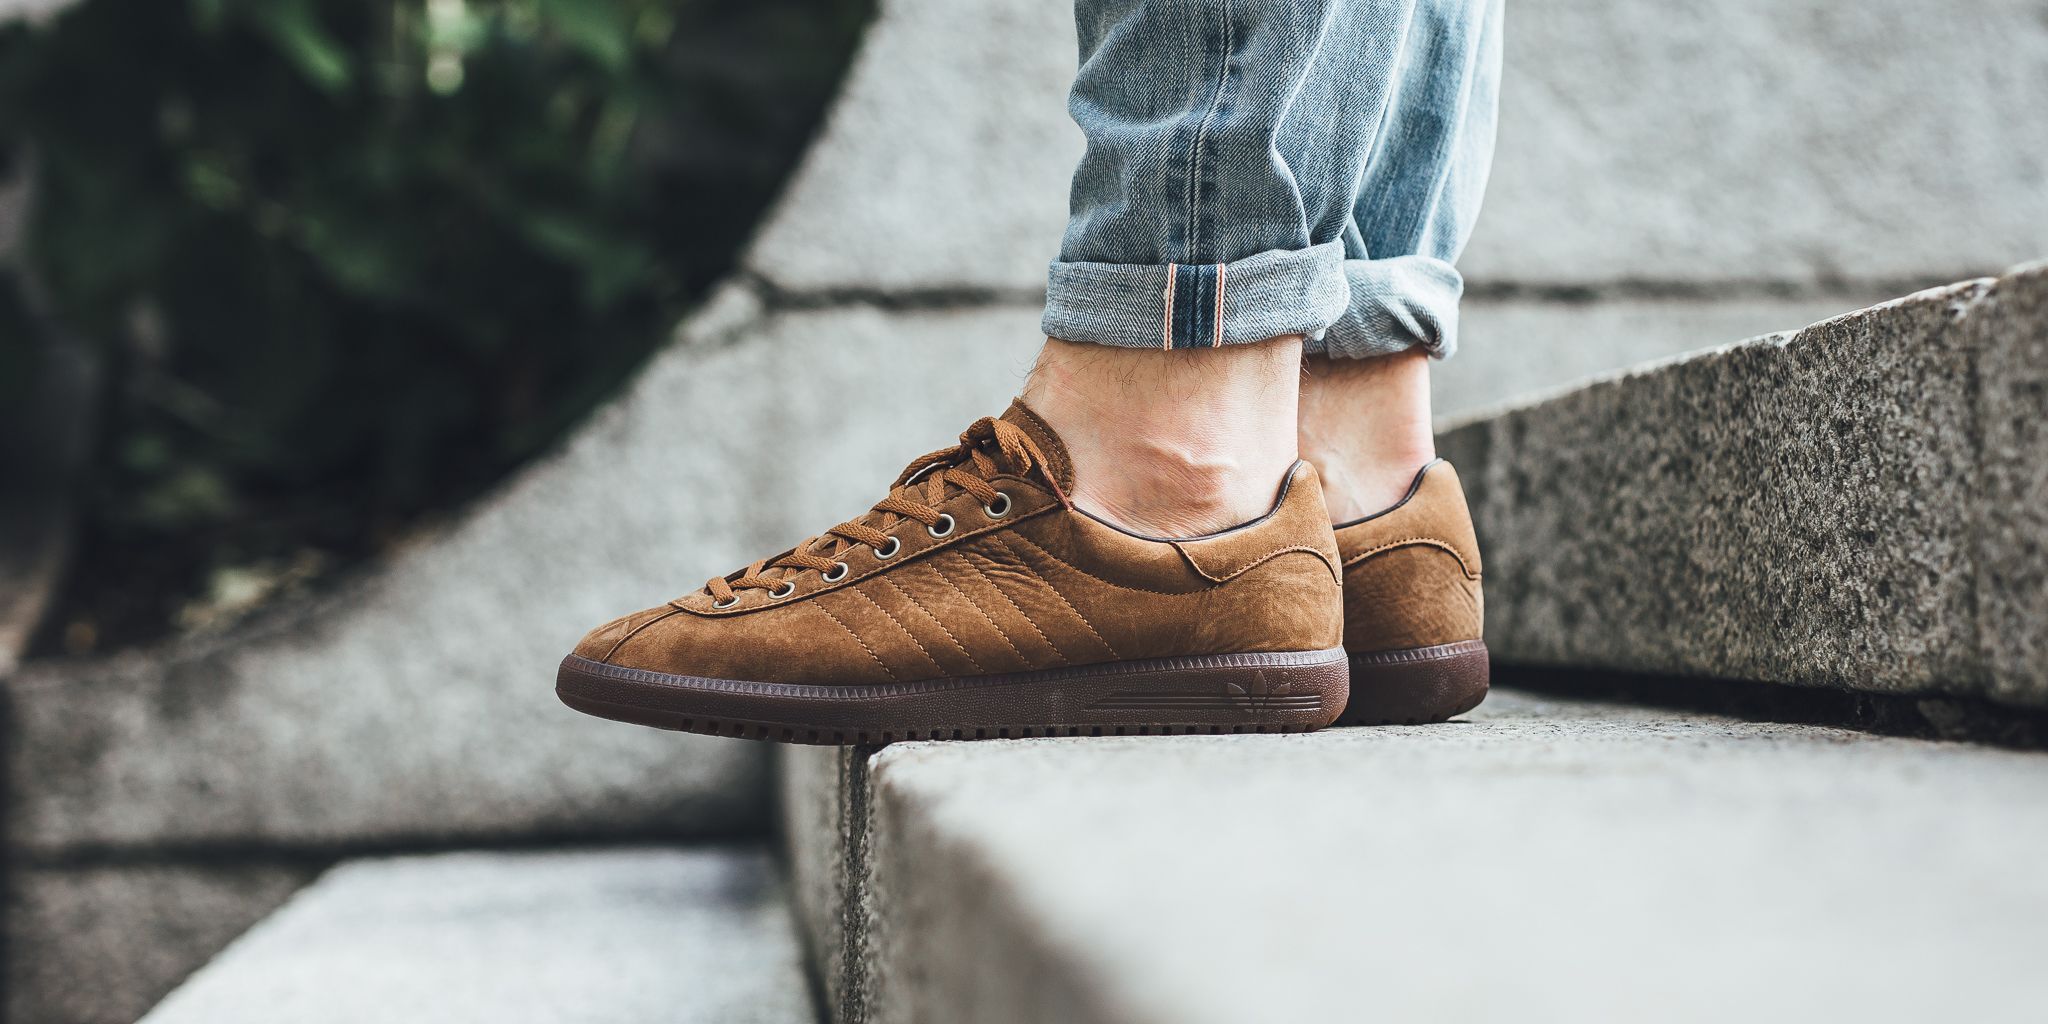 Titolo on Twitter: "ONLINE NOW 🍂 Adidas Super #Spezial - Wood/Wood/Night Brown HERE https://t.co/fR7dctJQMc #adidasSPEZIAL # adidas #tobacco https://t.co/nZU17nExr5" / Twitter